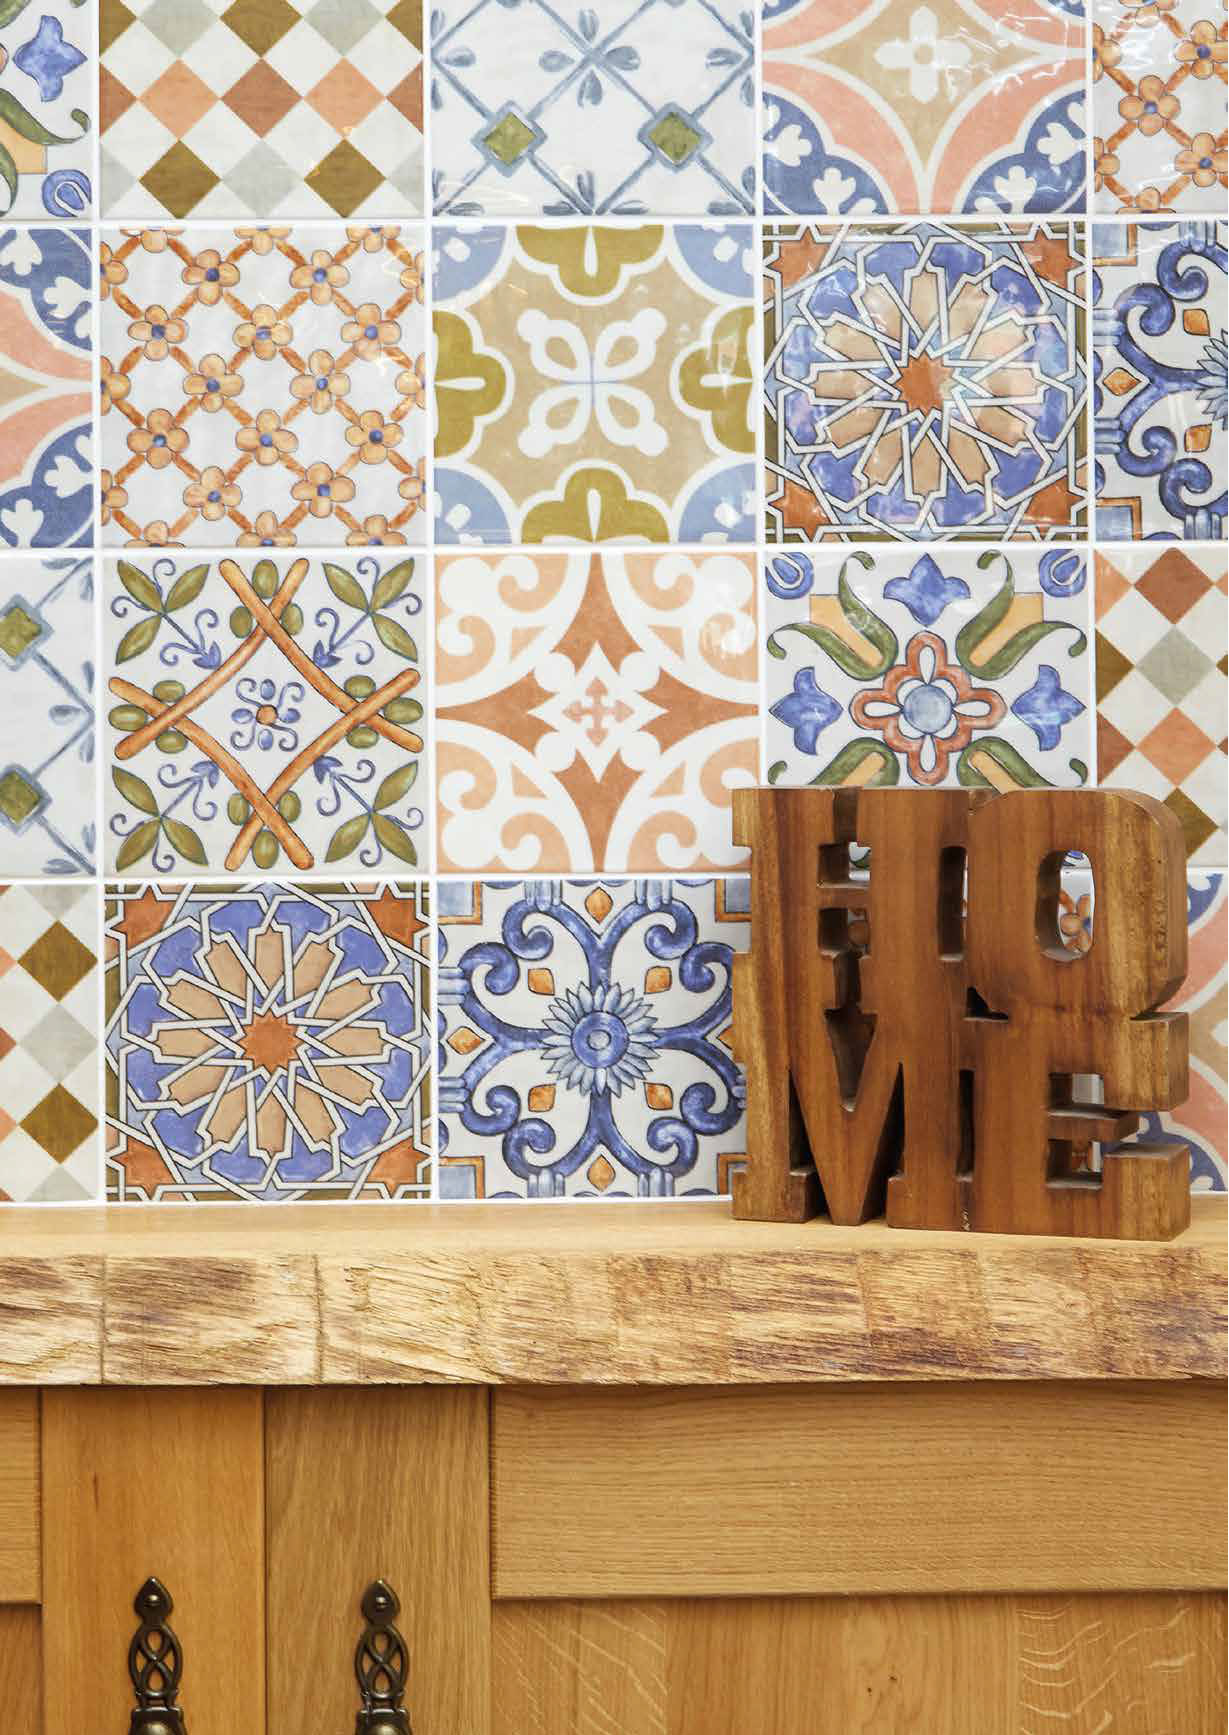 Patterned Wall Tiles - traditional and modern | TW Thomas, Swansea